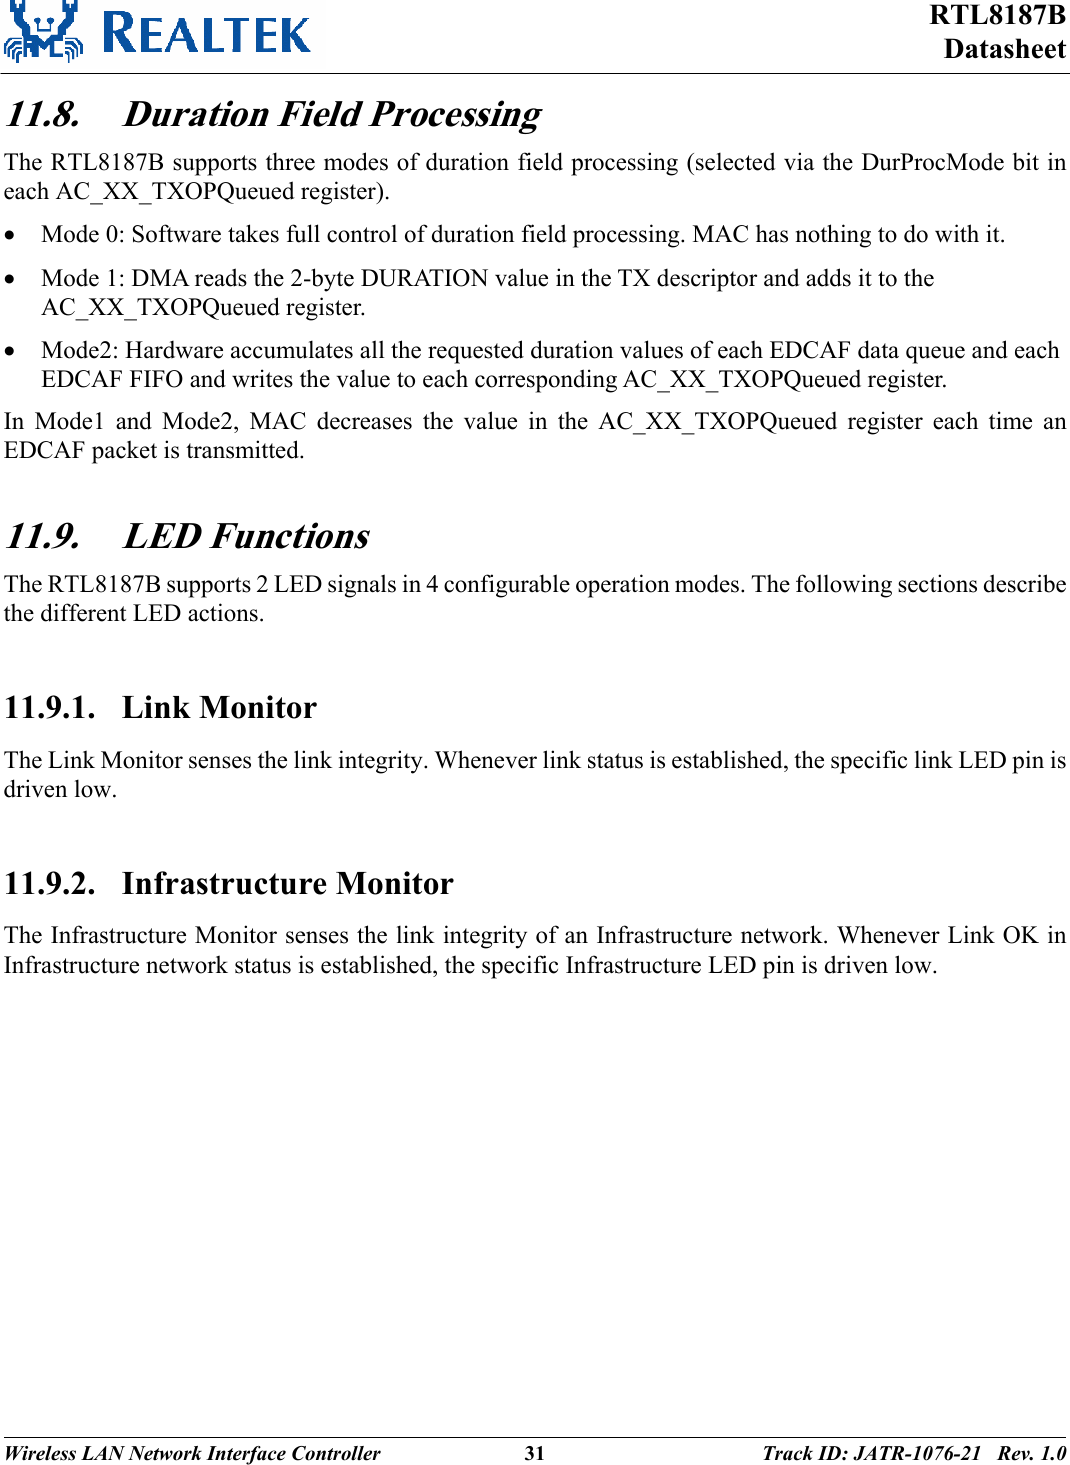 RTL8187B Datasheet Wireless LAN Network Interface Controller  31 Track ID: JATR-1076-21   Rev. 1.0  11.8. Duration Field Processing The RTL8187B supports three modes of duration field processing (selected via the DurProcMode bit in each AC_XX_TXOPQueued register). • Mode 0: Software takes full control of duration field processing. MAC has nothing to do with it. • Mode 1: DMA reads the 2-byte DURATION value in the TX descriptor and adds it to the AC_XX_TXOPQueued register. • Mode2: Hardware accumulates all the requested duration values of each EDCAF data queue and each EDCAF FIFO and writes the value to each corresponding AC_XX_TXOPQueued register. In Mode1 and Mode2, MAC decreases the value in the AC_XX_TXOPQueued register each time an EDCAF packet is transmitted.  11.9. LED Functions The RTL8187B supports 2 LED signals in 4 configurable operation modes. The following sections describe the different LED actions.  11.9.1. Link Monitor The Link Monitor senses the link integrity. Whenever link status is established, the specific link LED pin is driven low.   11.9.2. Infrastructure Monitor The Infrastructure Monitor senses the link integrity of an Infrastructure network. Whenever Link OK in Infrastructure network status is established, the specific Infrastructure LED pin is driven low.  